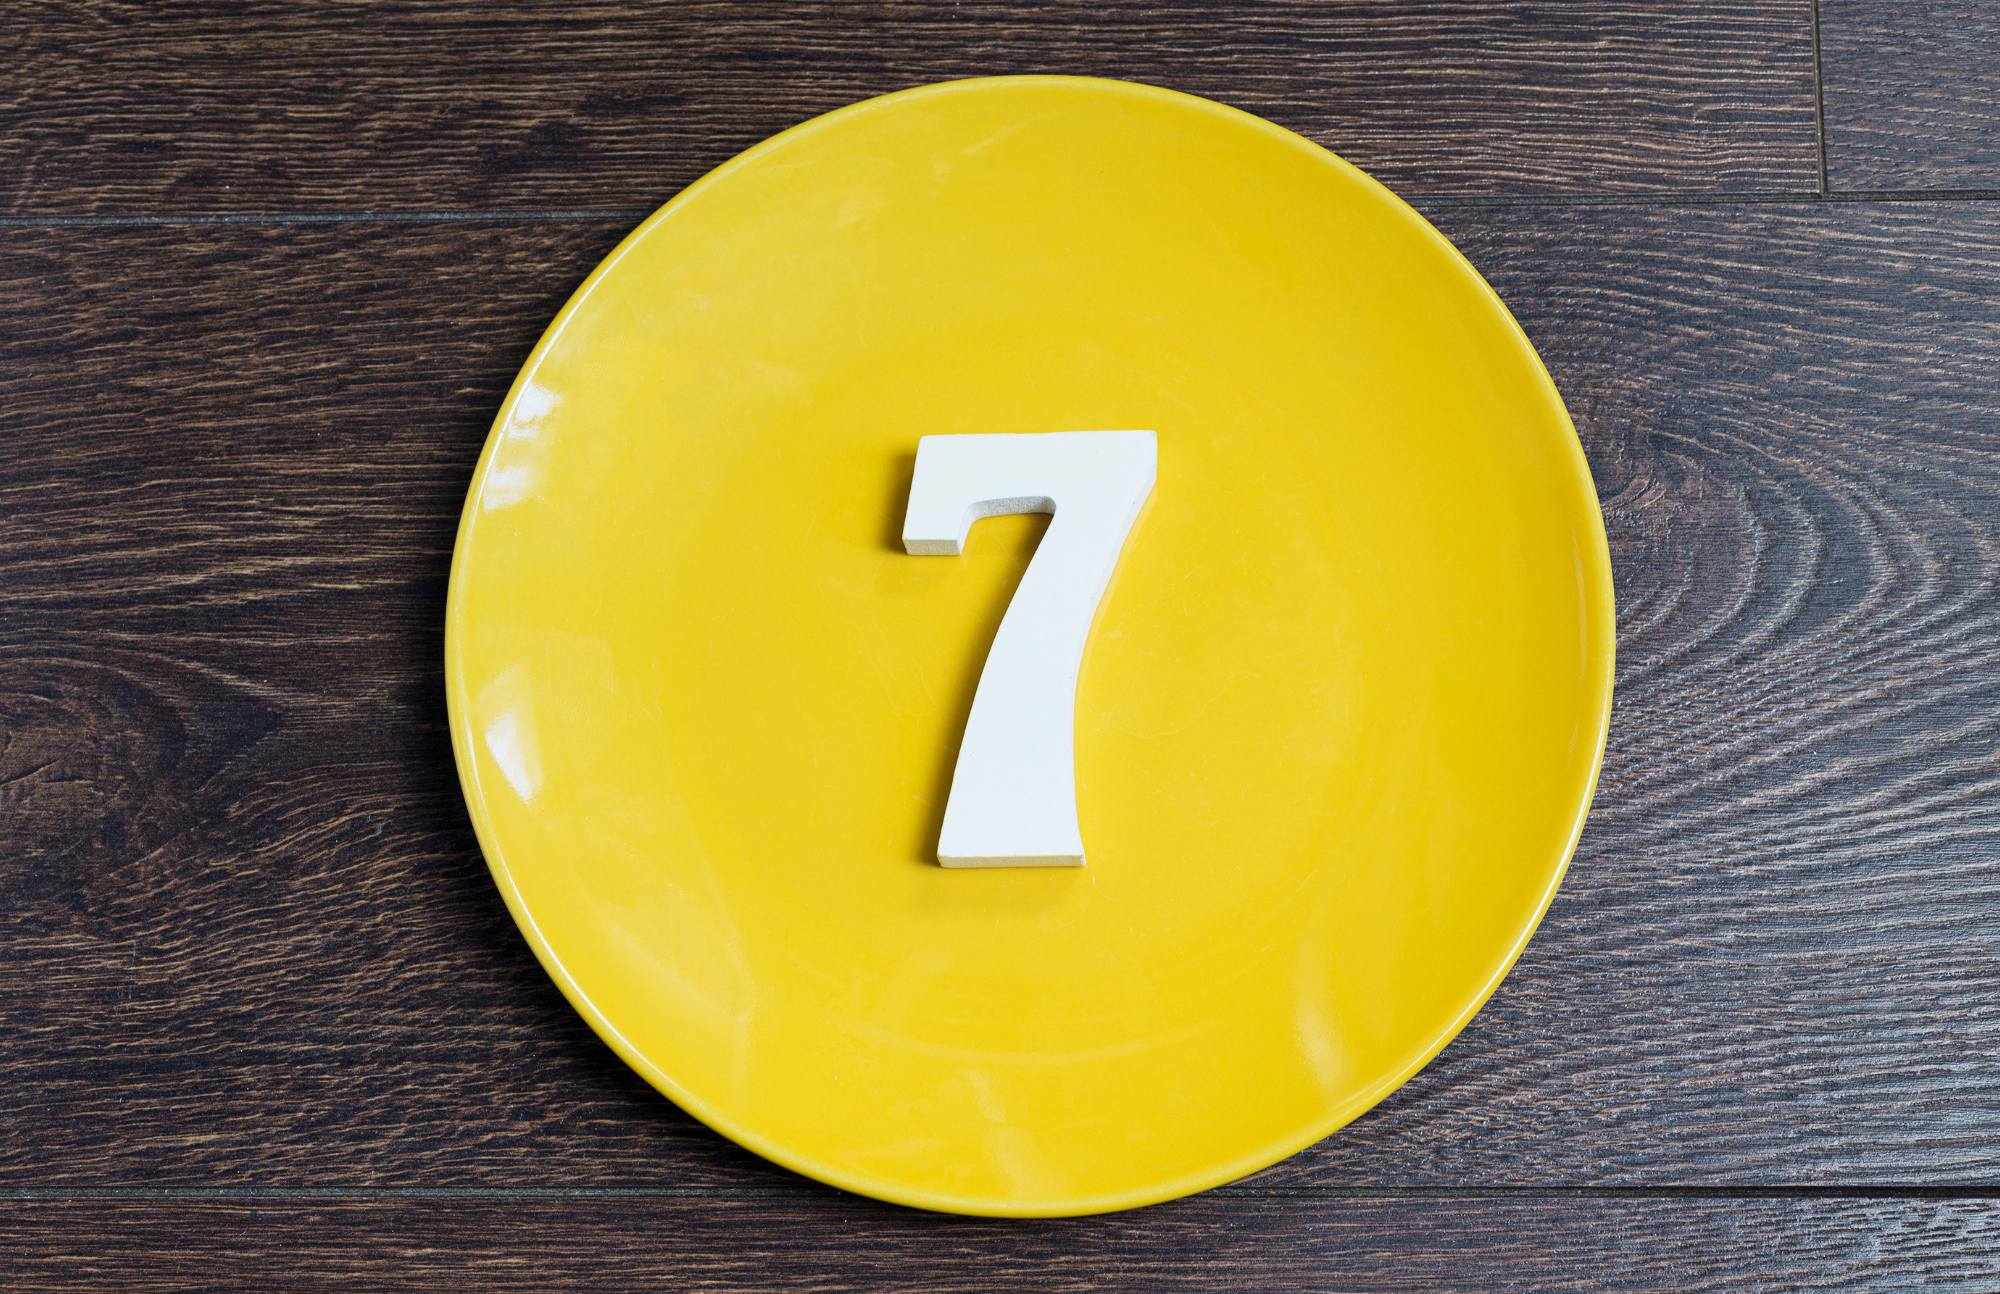 The number 7 in a yellow circle.